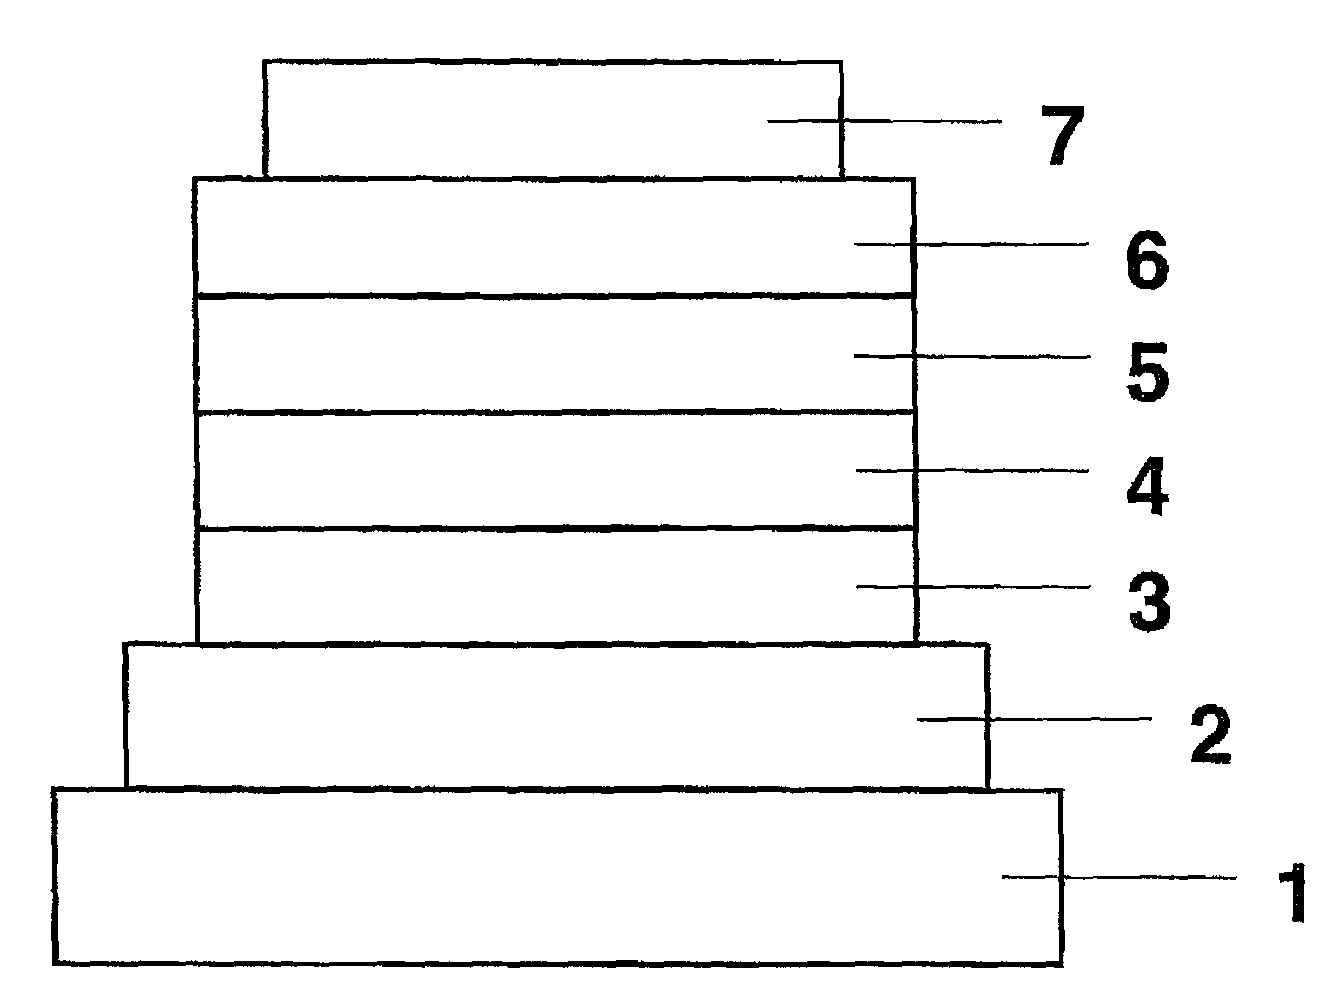 Organic electroluminescent device having a light-emitting layer comprising a host material of two or more compounds